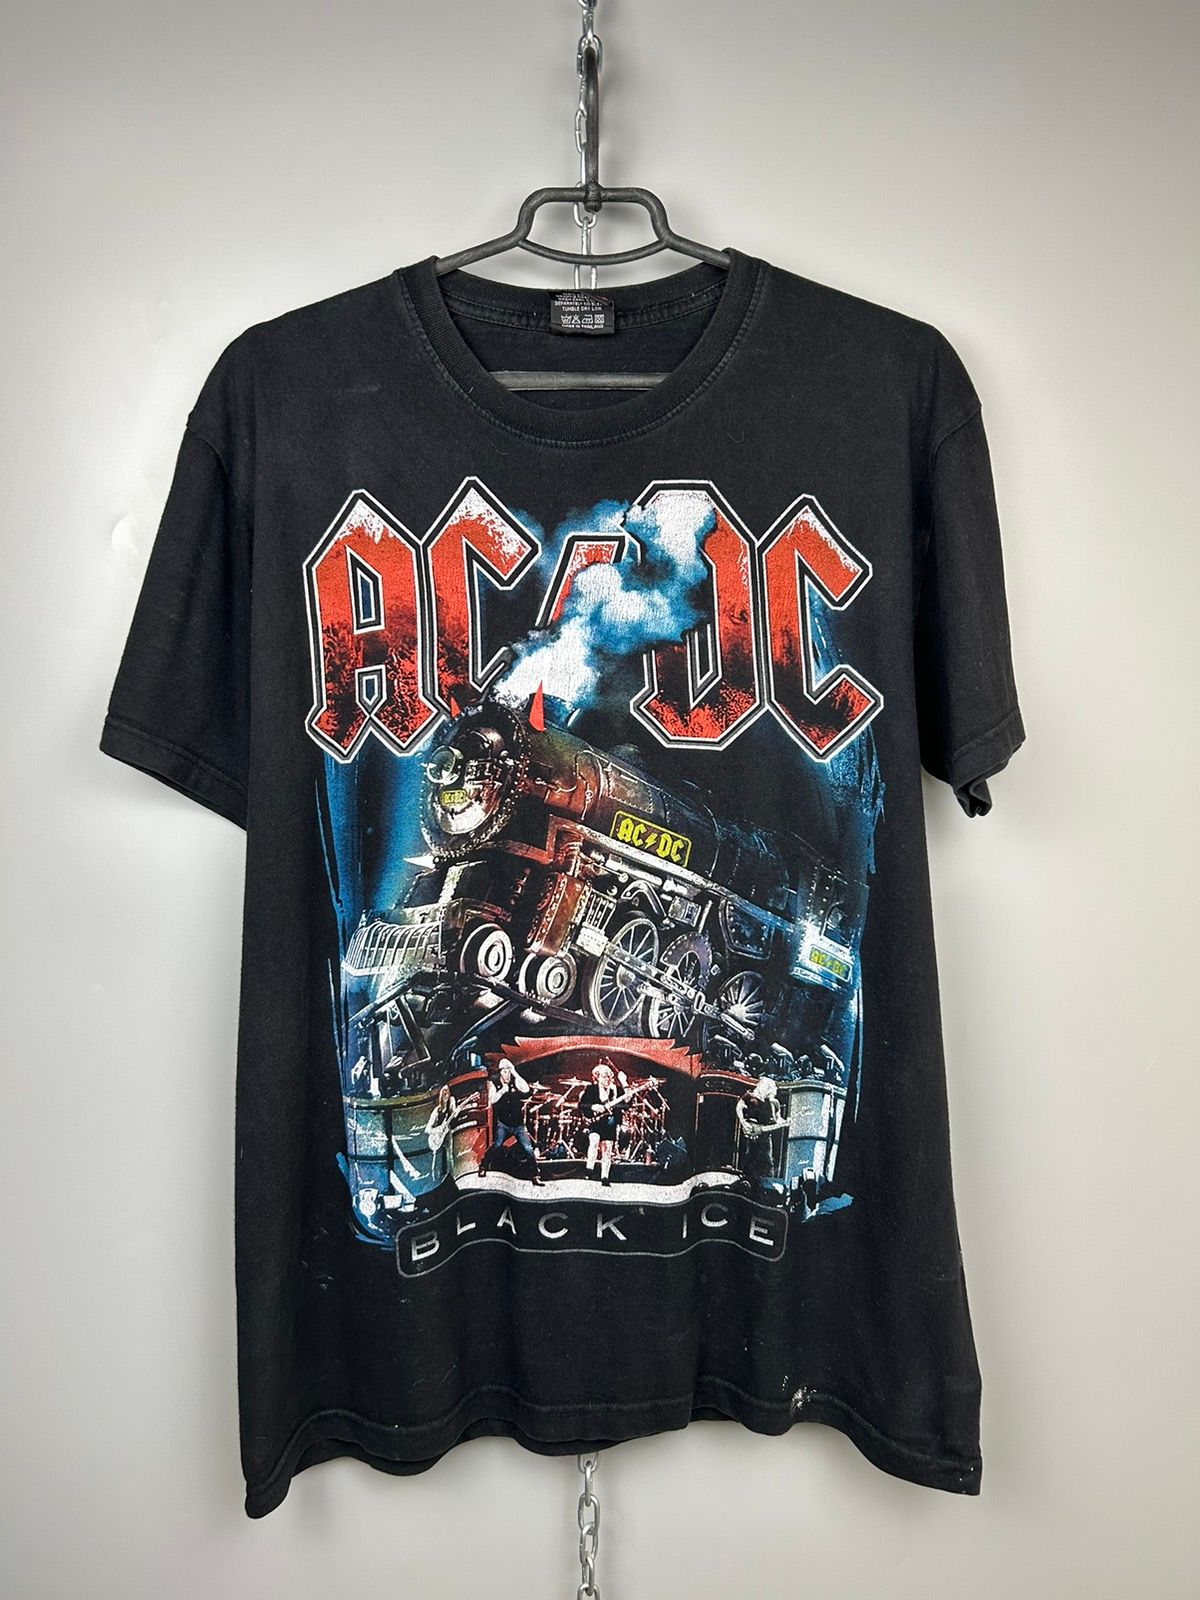 Vintage ACDC Black Ice Band Tee T shirt rare Size US L / EU 52-54 / 3 - 1 Preview